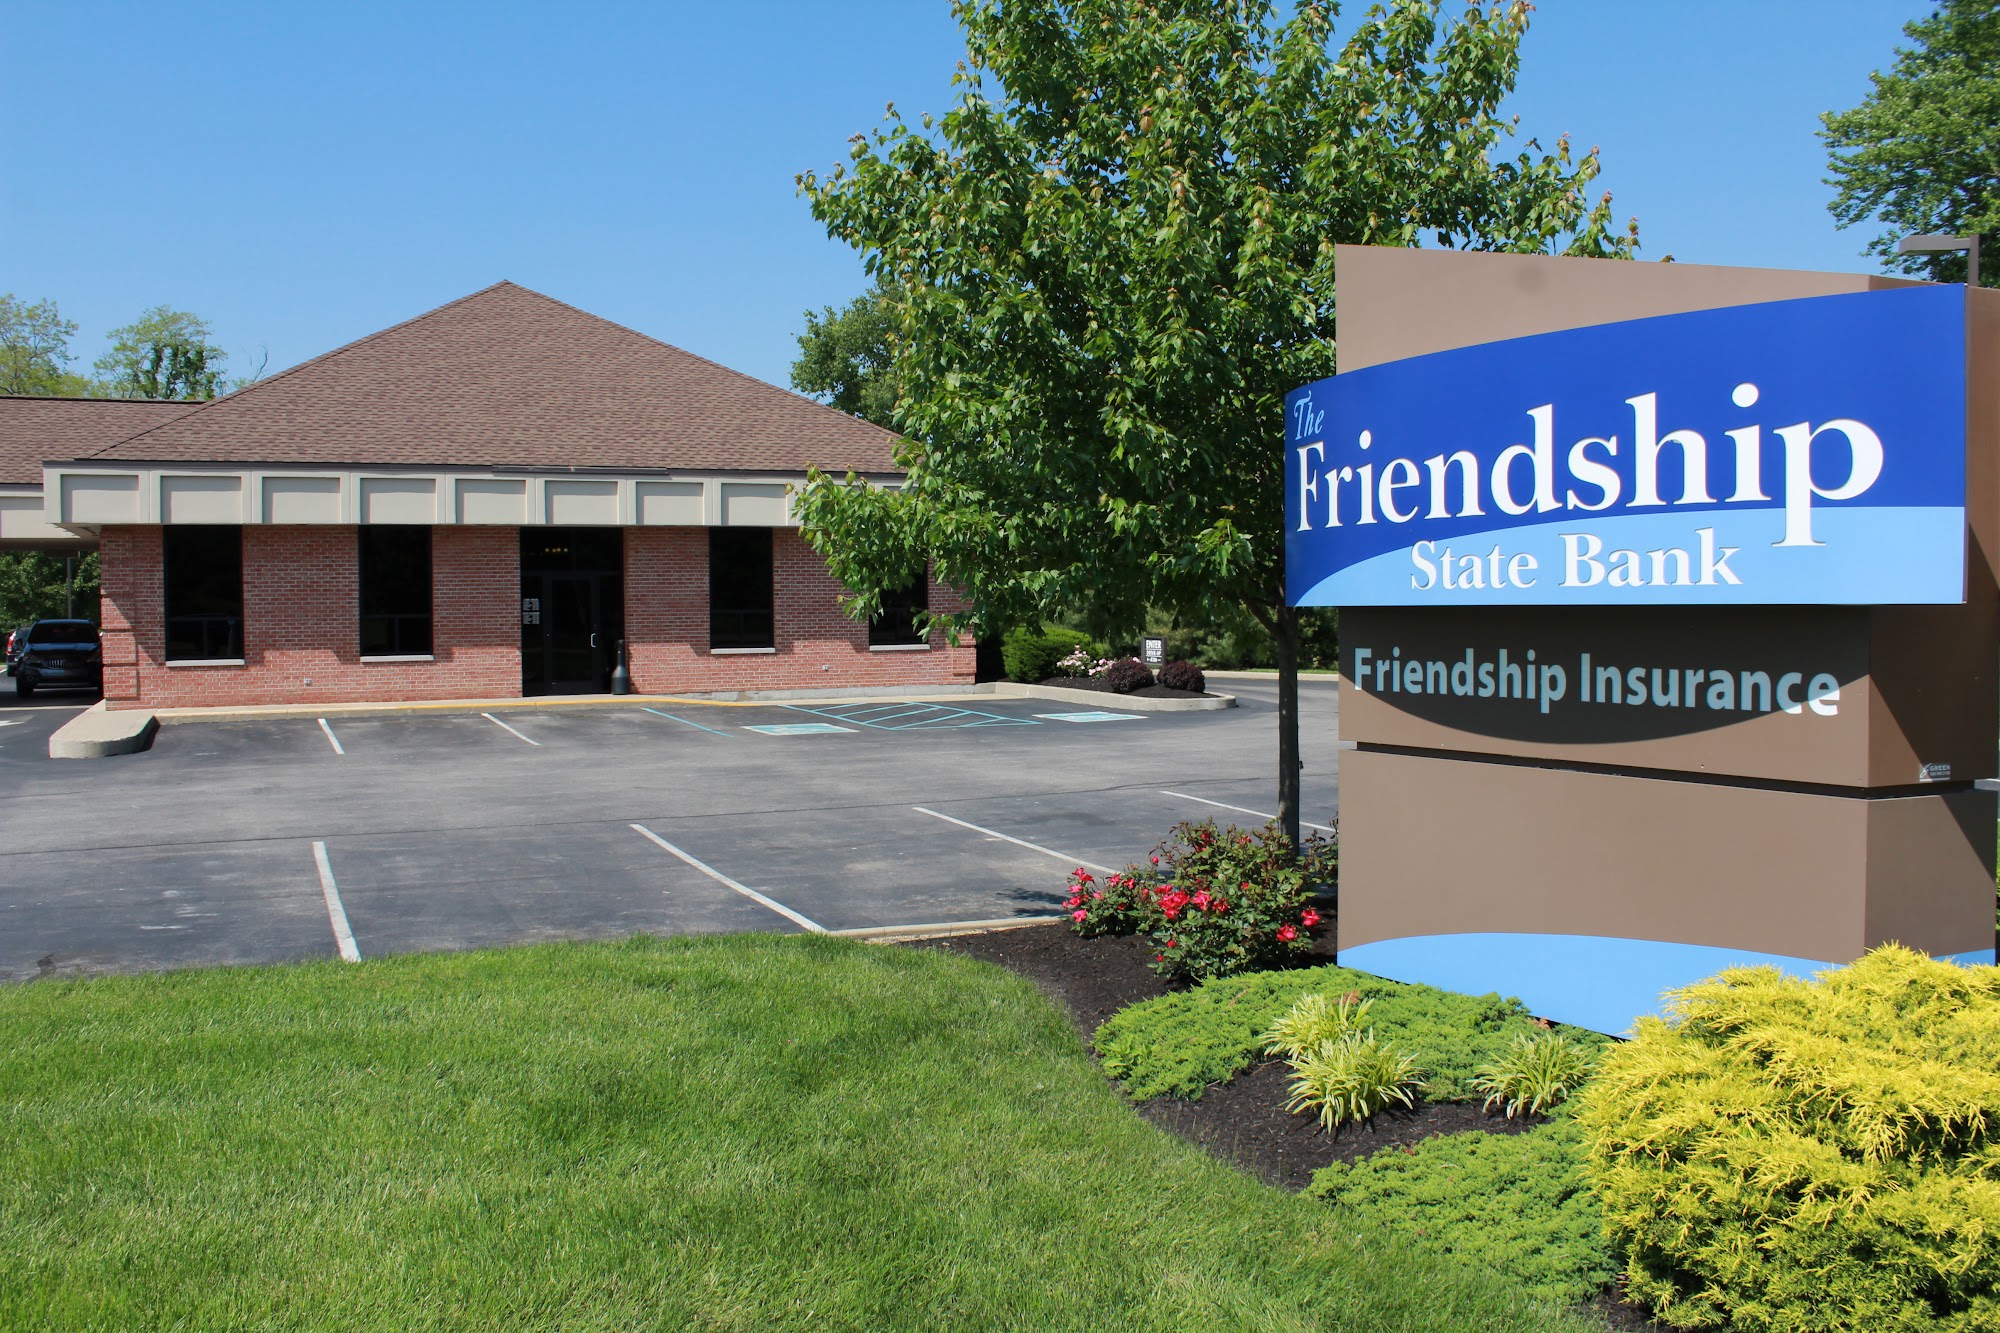 The Friendship State Bank